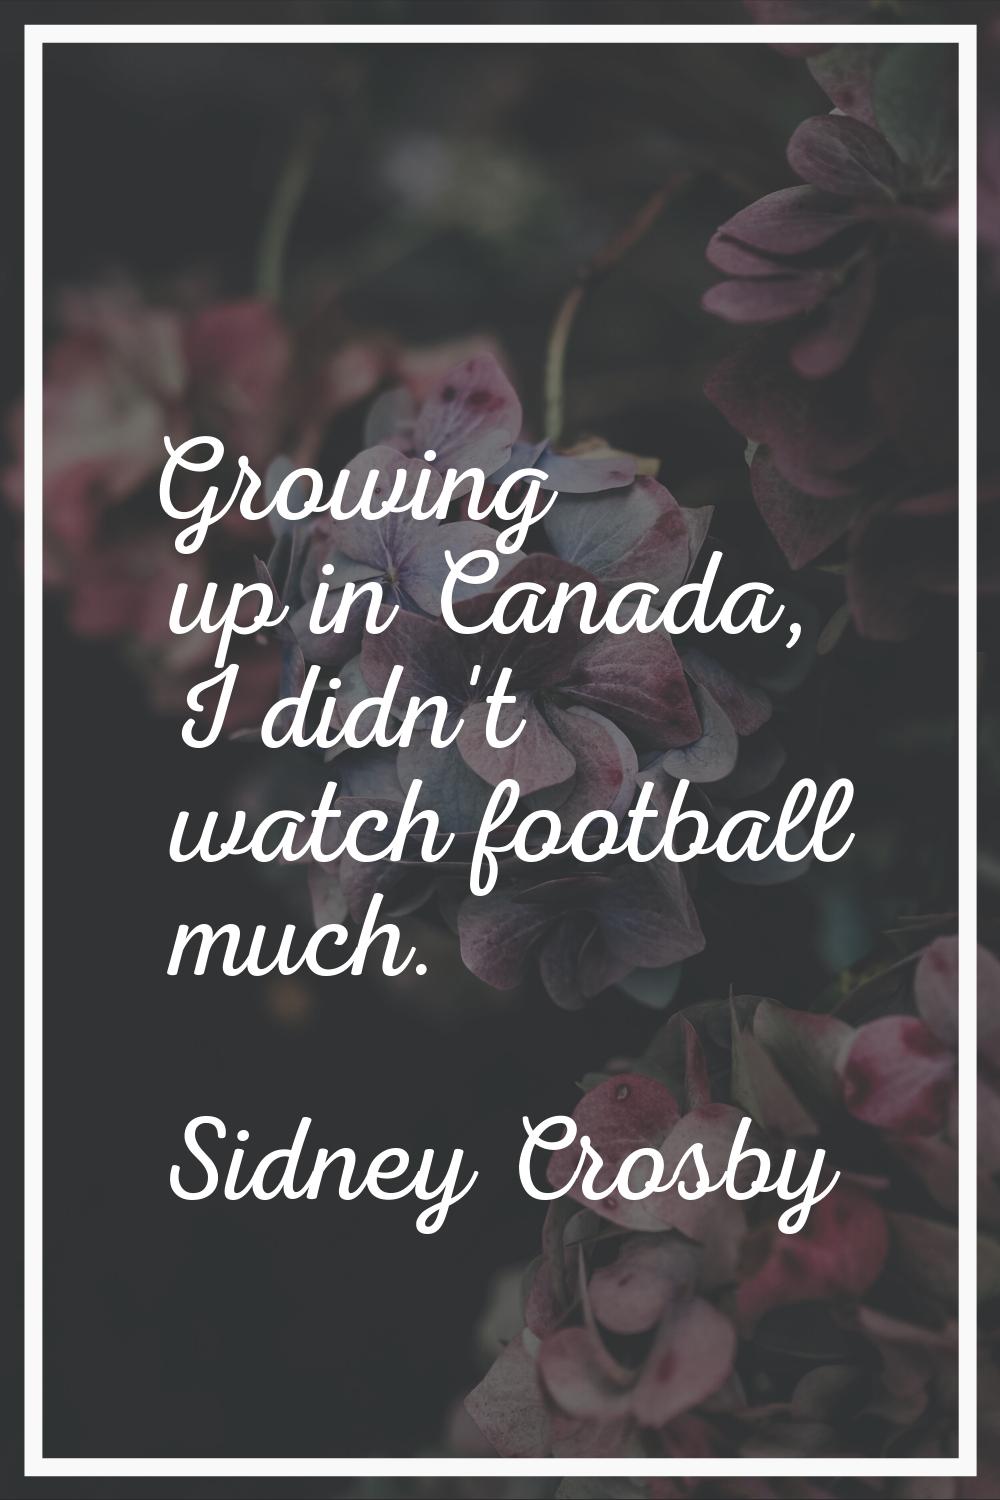 Growing up in Canada, I didn't watch football much.